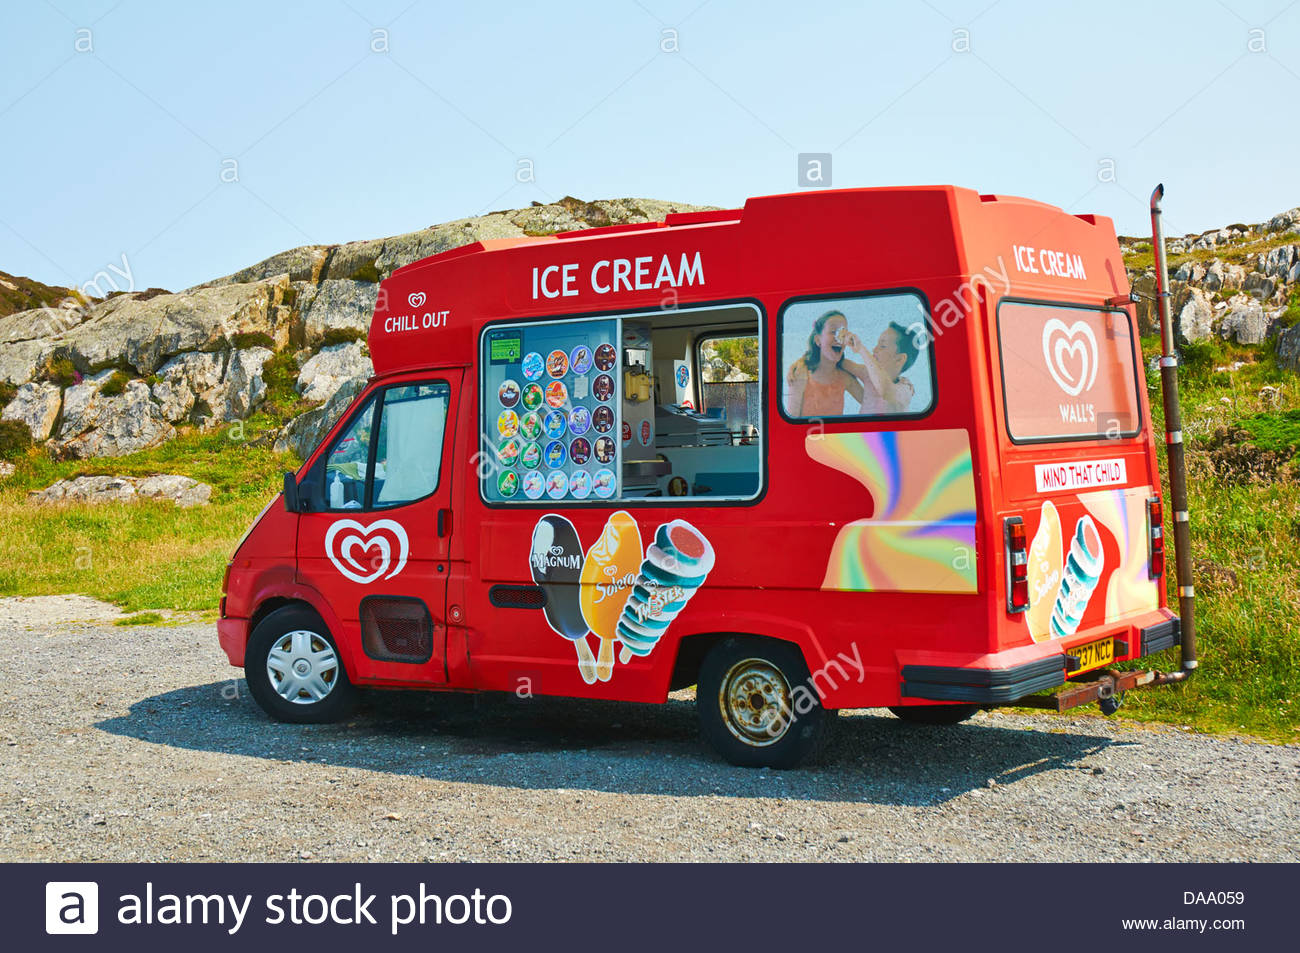 red ice cream van parked in a roadside 